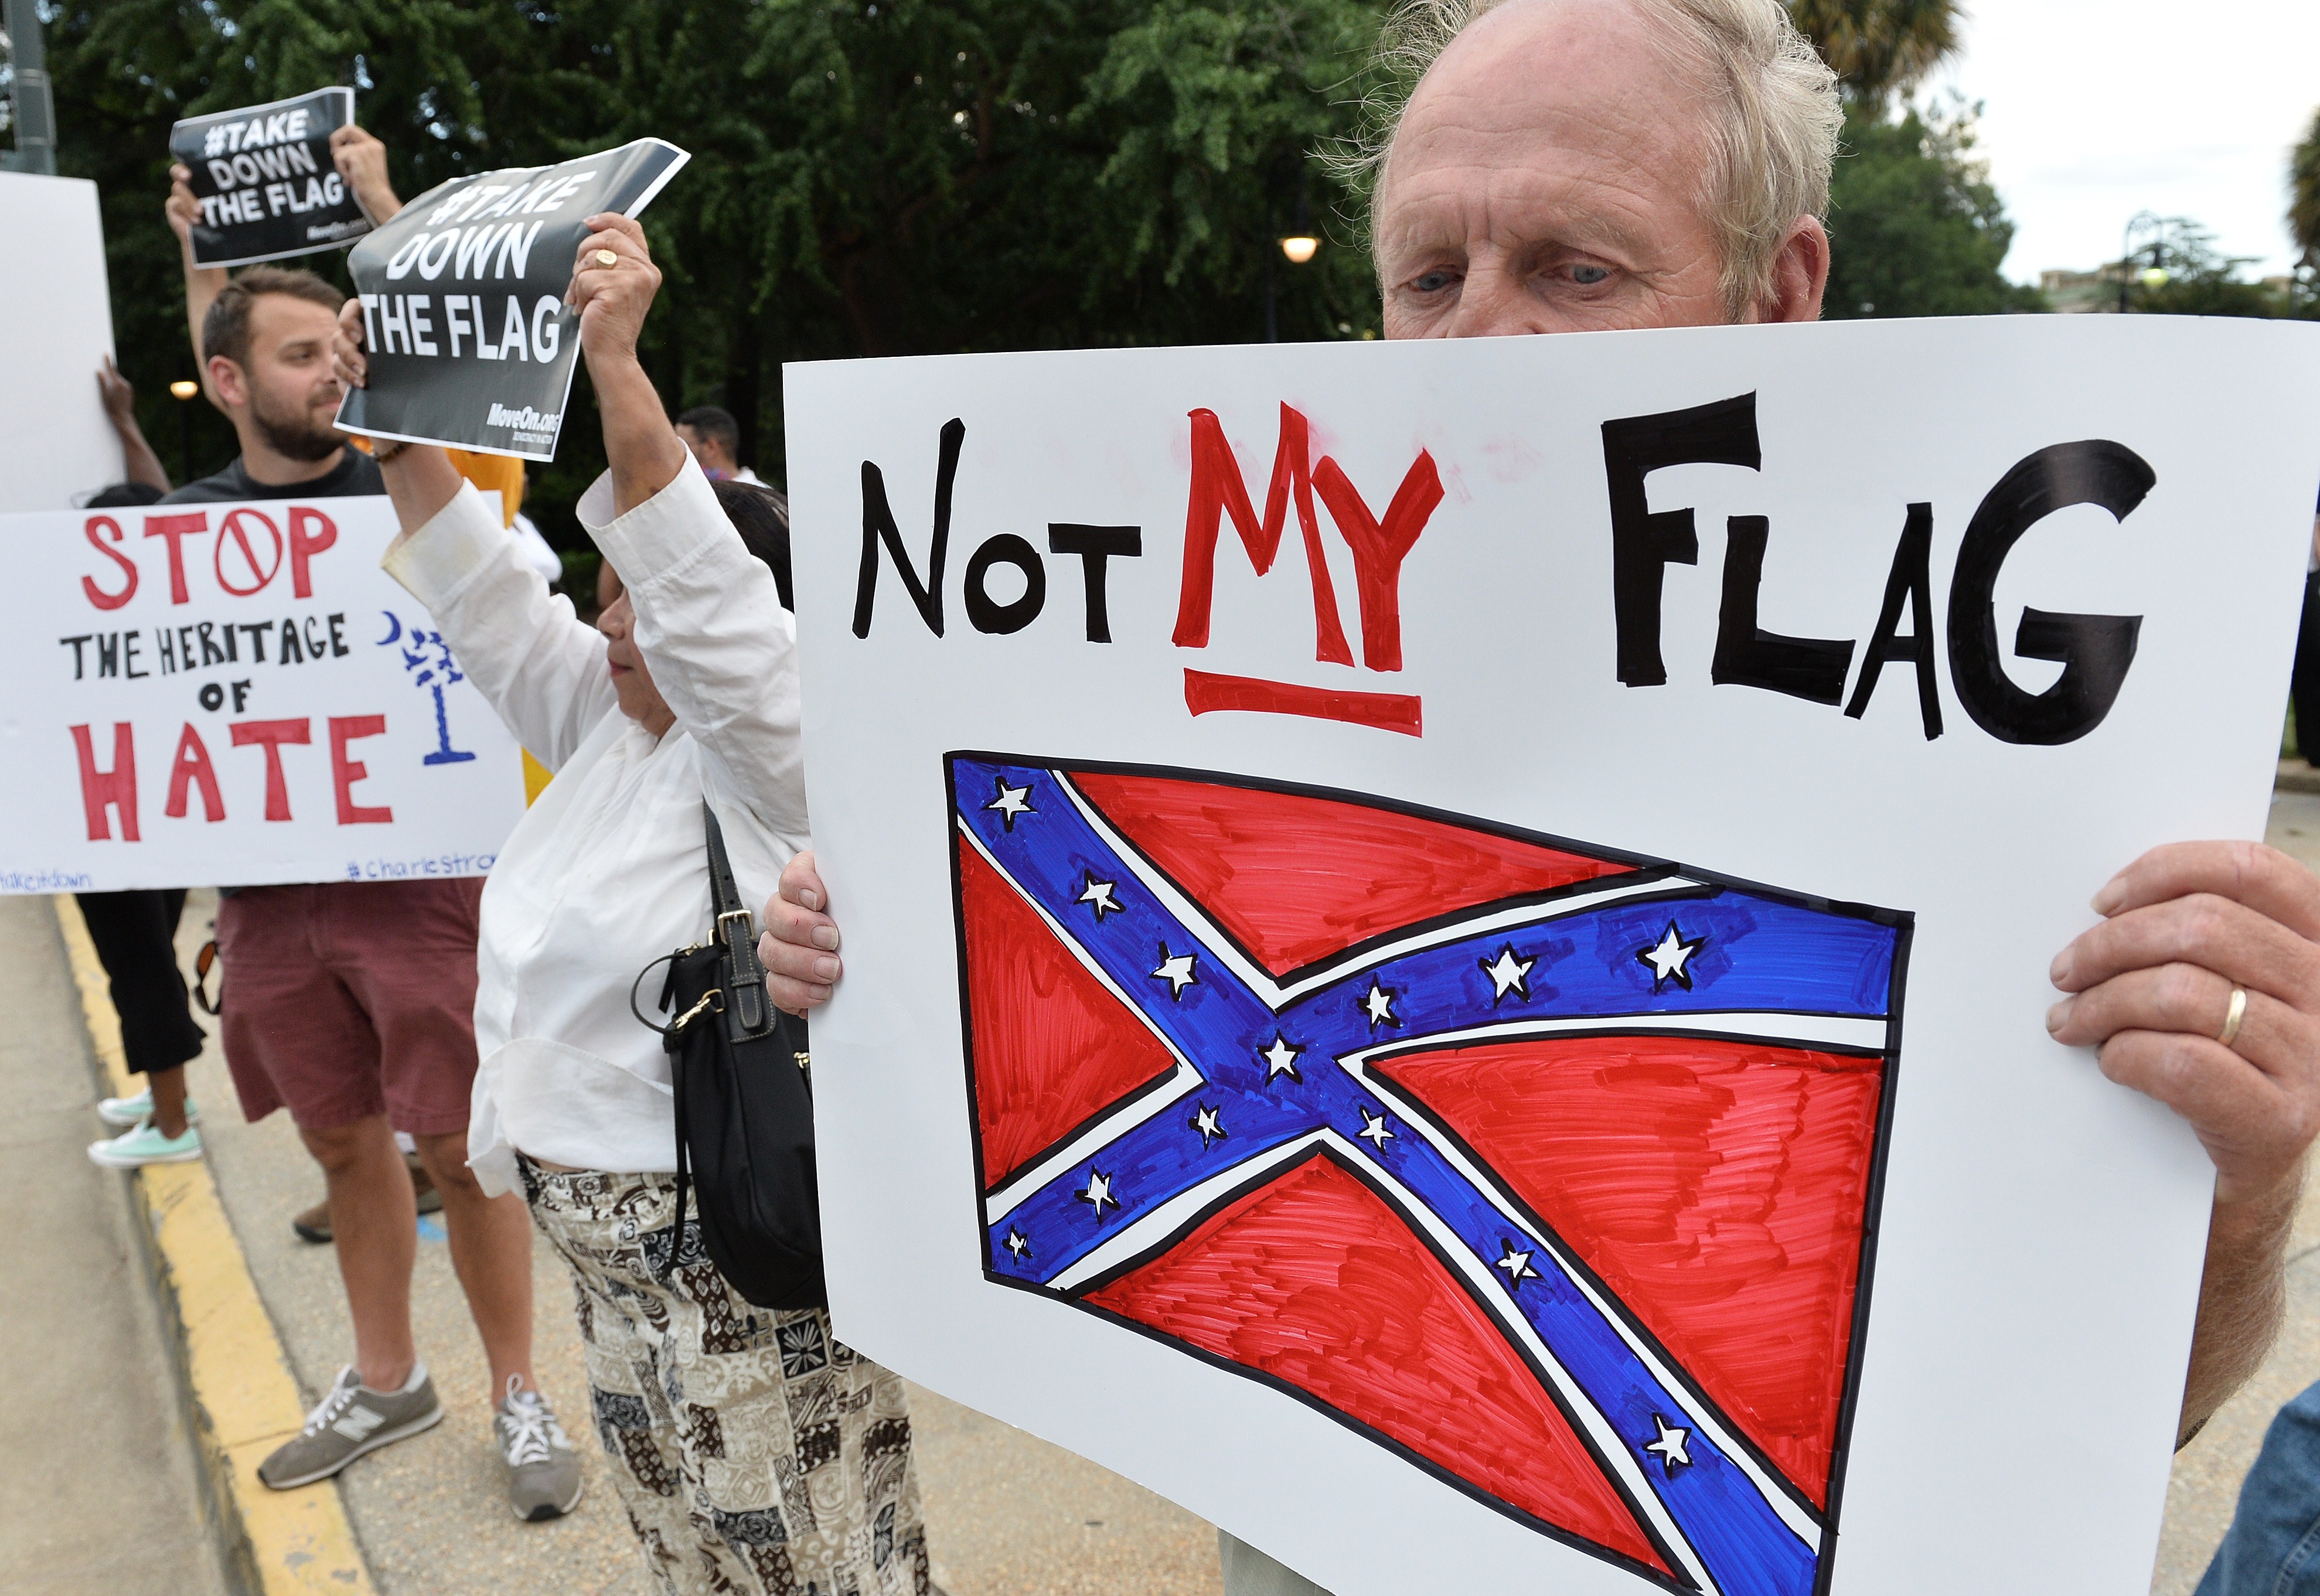 A man holds a sign up during a protest rally against the Confederate flag in Columbia, South Carolina on June 20, 2015. (MLADEN ANTONOV / AFP/Getty Images)